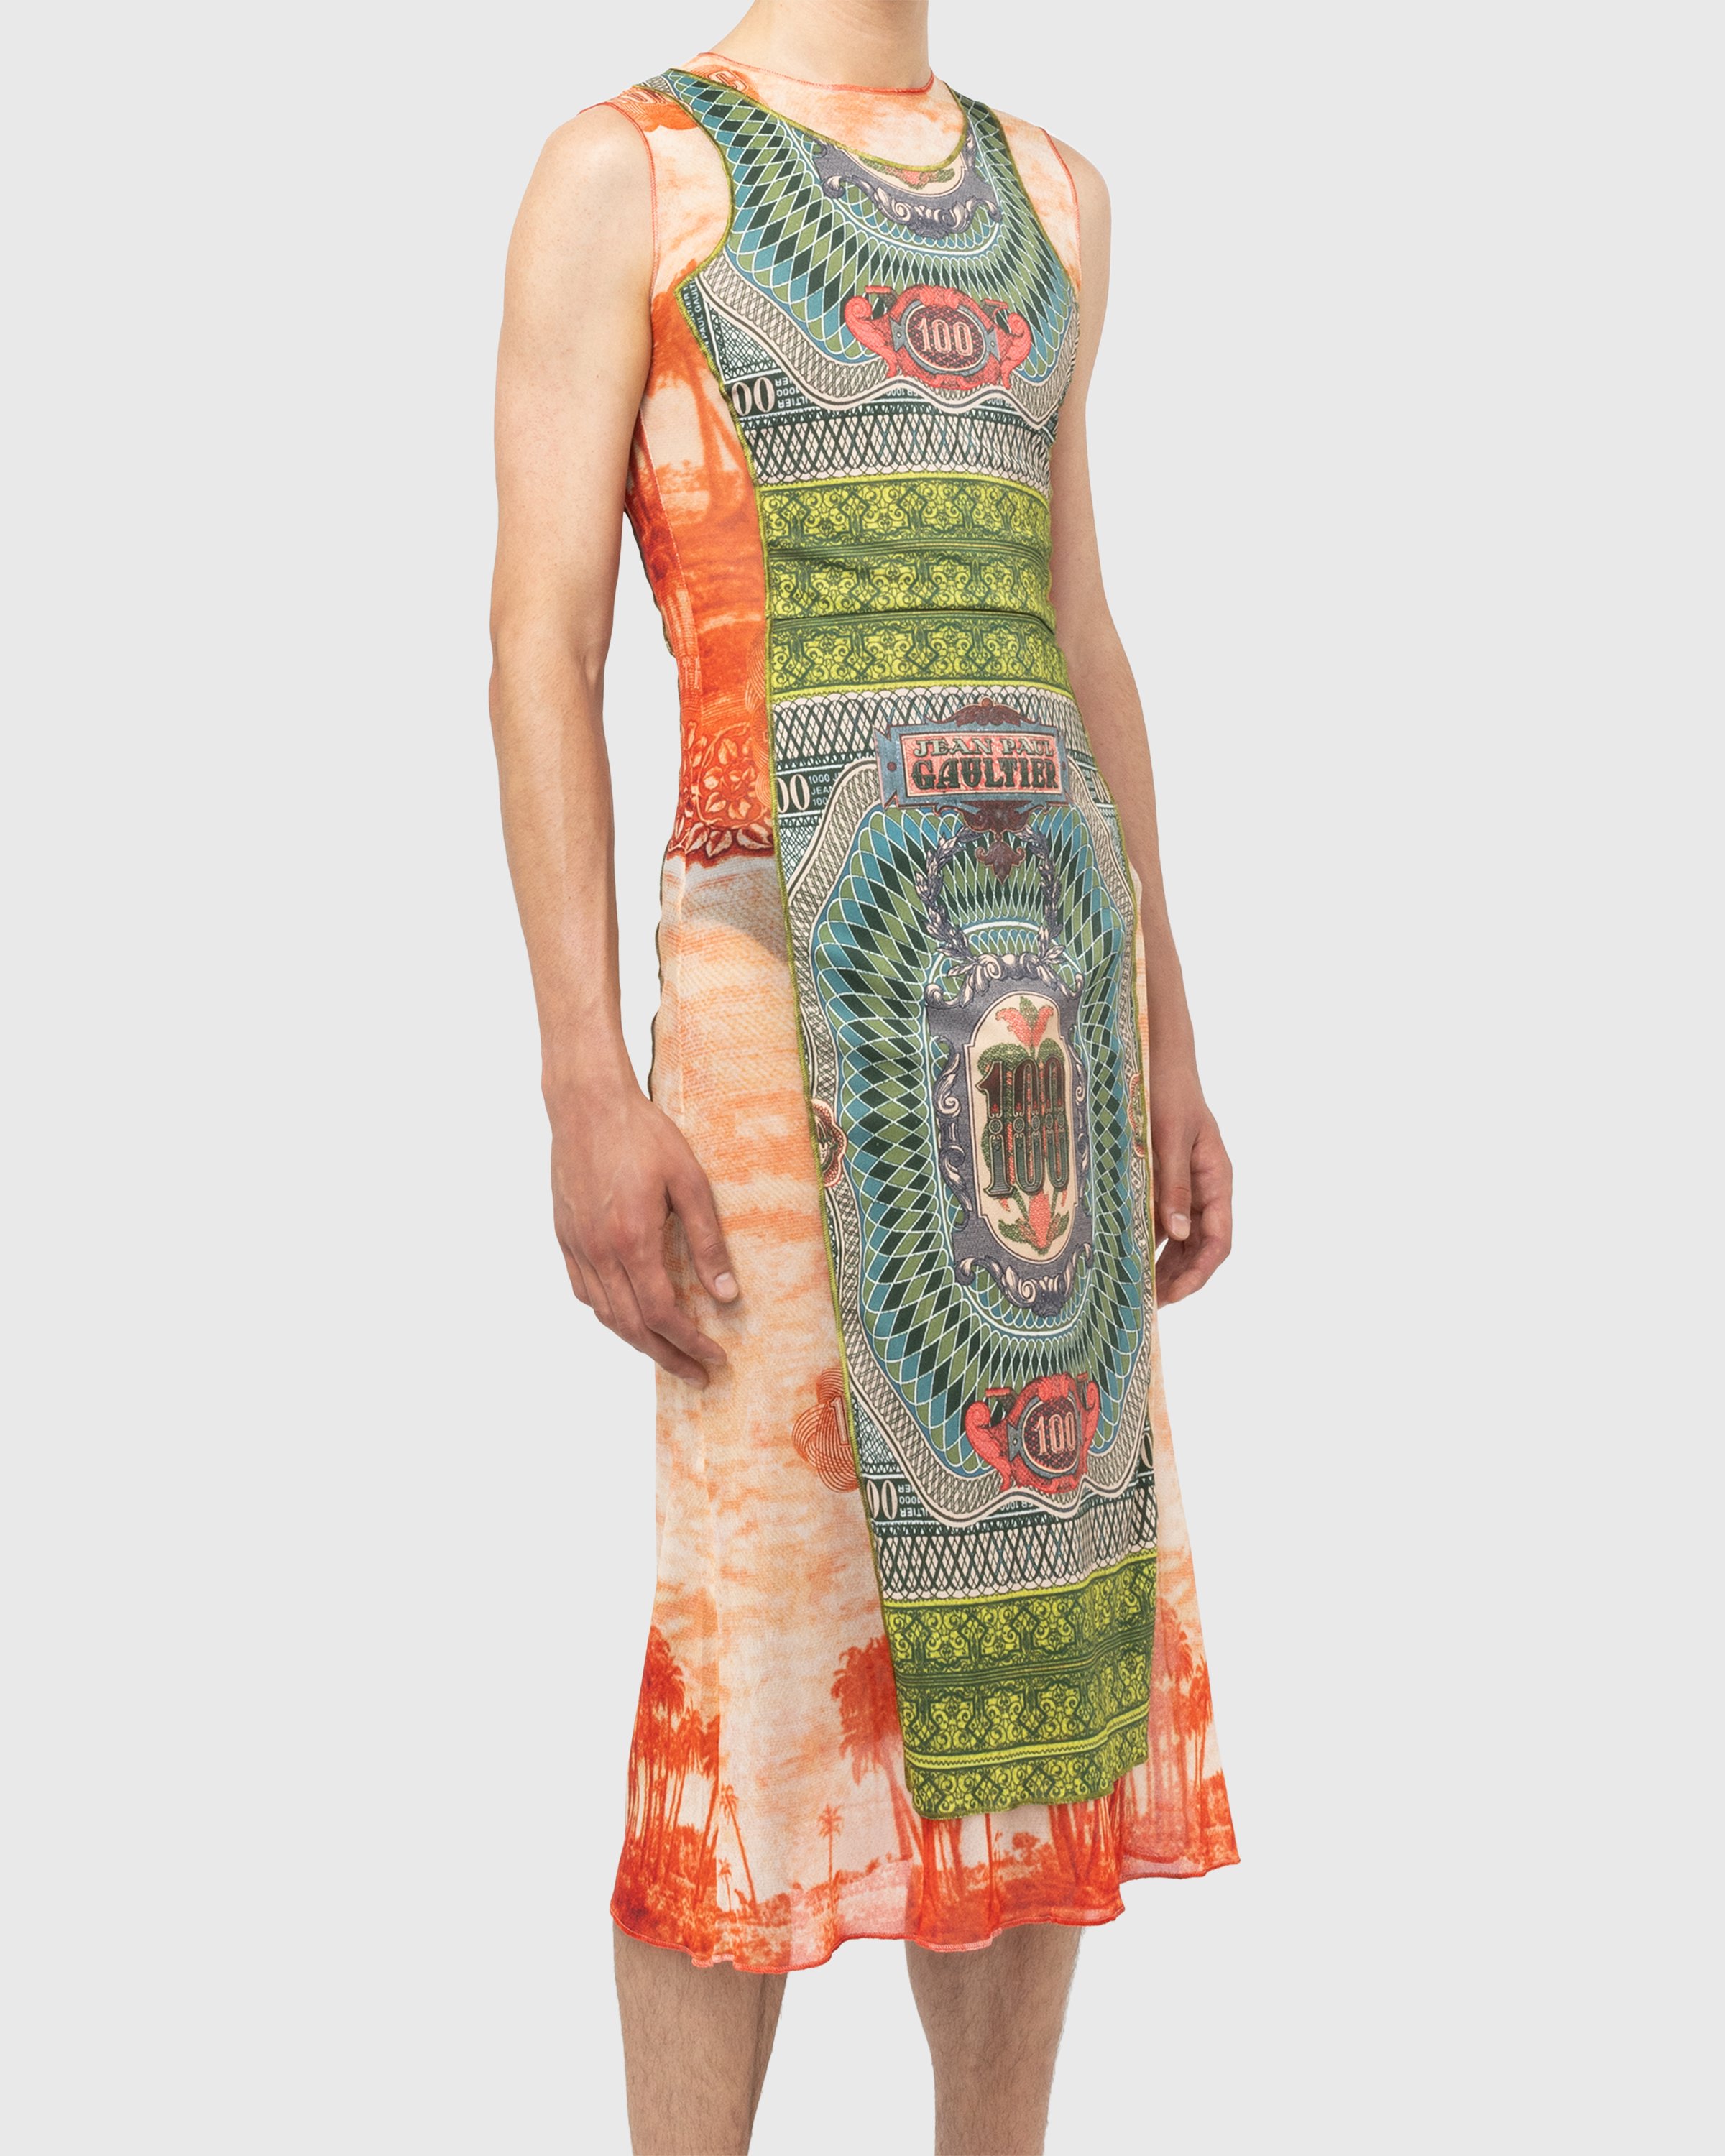 Jean Paul Gaultier - Banknote and Palm Tree Print Dress Multi - Clothing - Green - Image 5